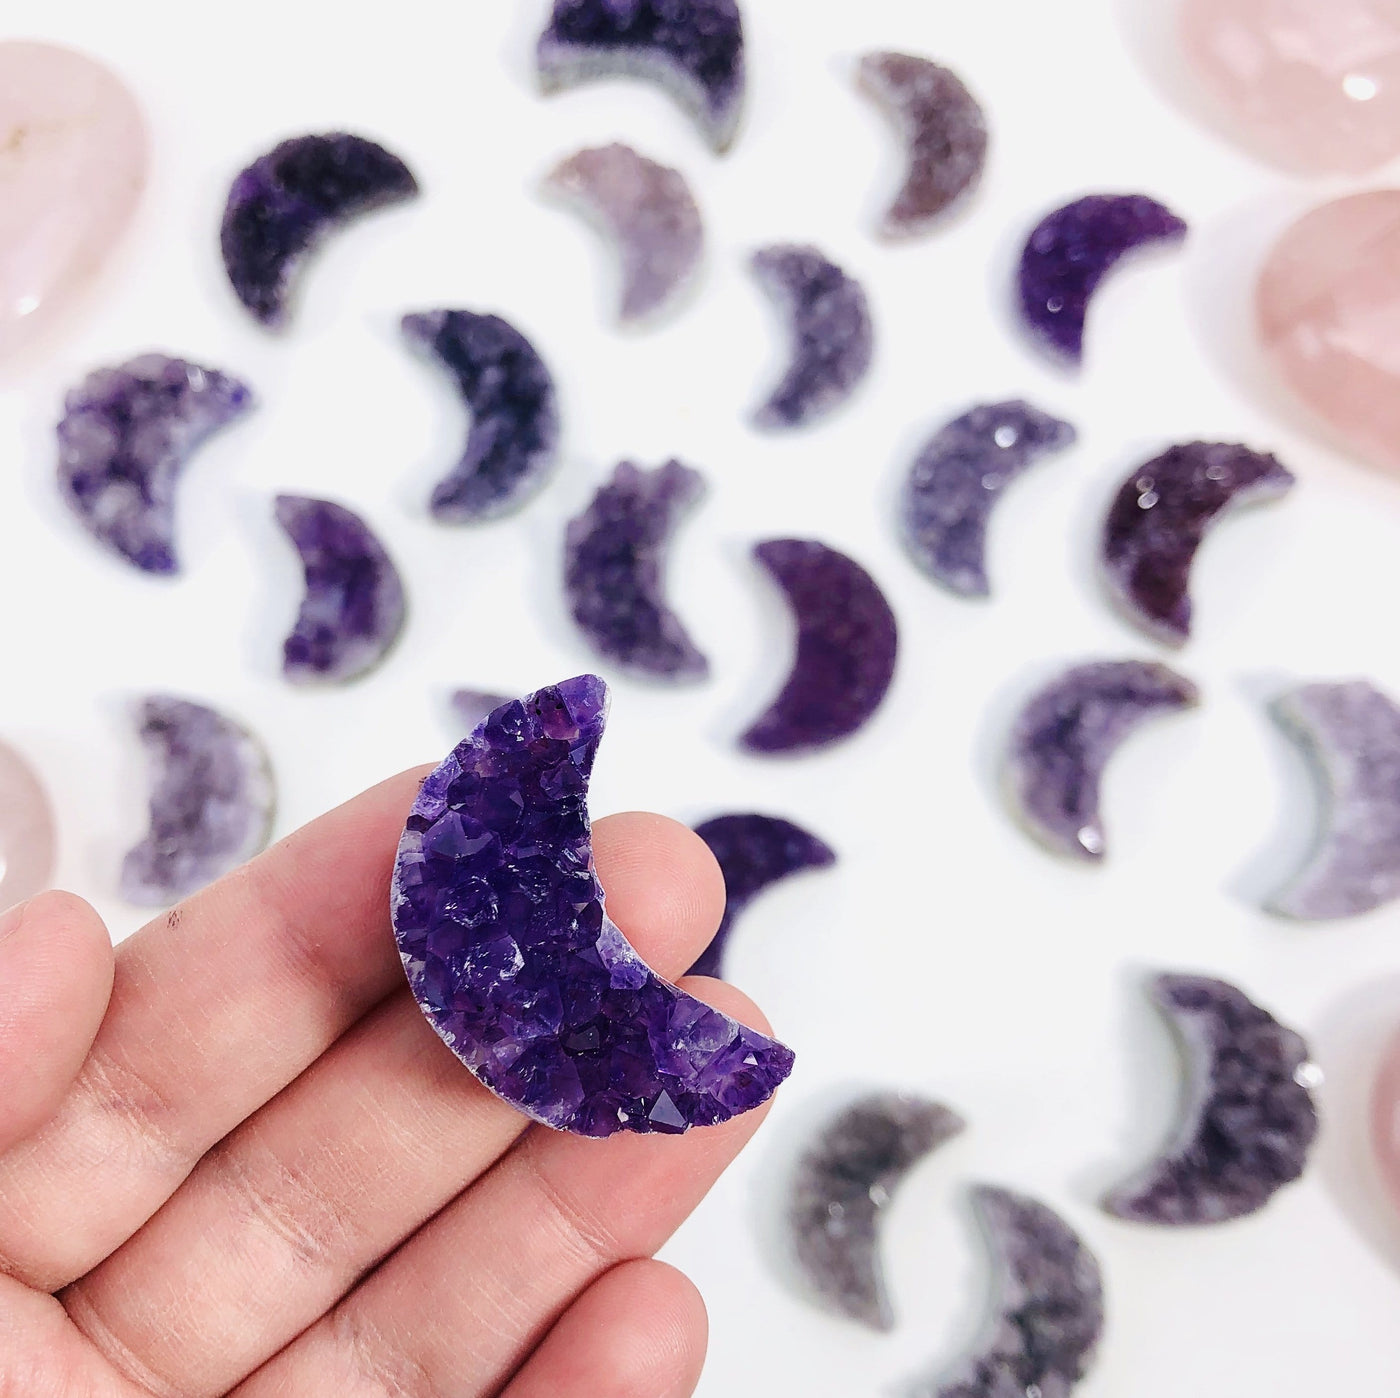 Amethyst Druzy Moon Crescent UNDRILLED Cabochon in hand for size reference